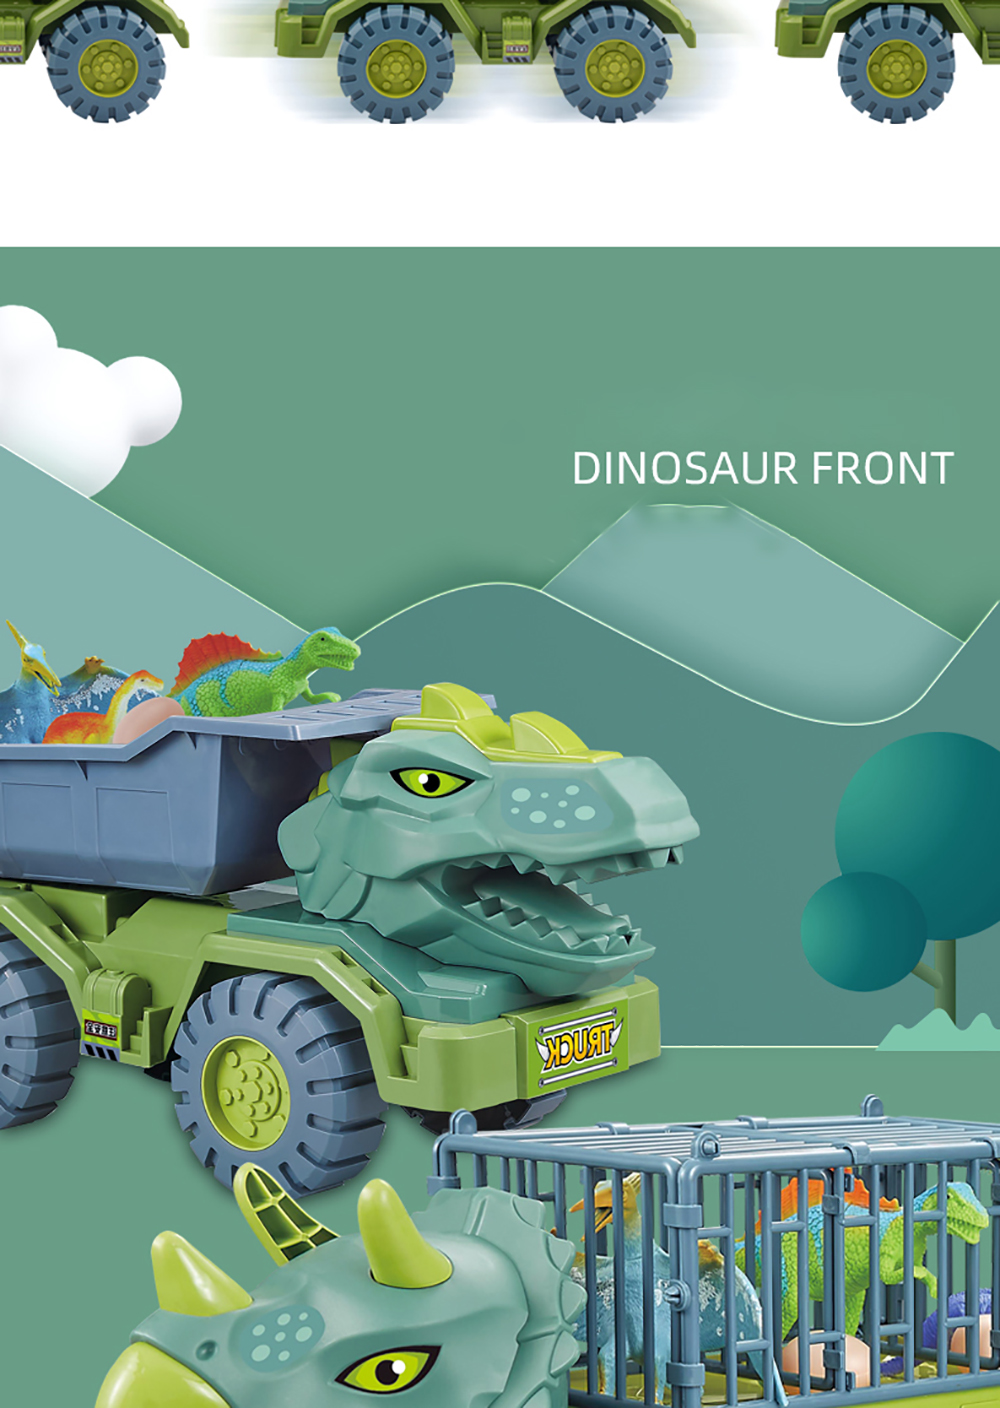 New-Style-Children-Dinosaur-Transport-Car-Inertial-Cars-Carrier-Truck-Toy-Pull-Back-Vehicle-Toy-with-1902704-5